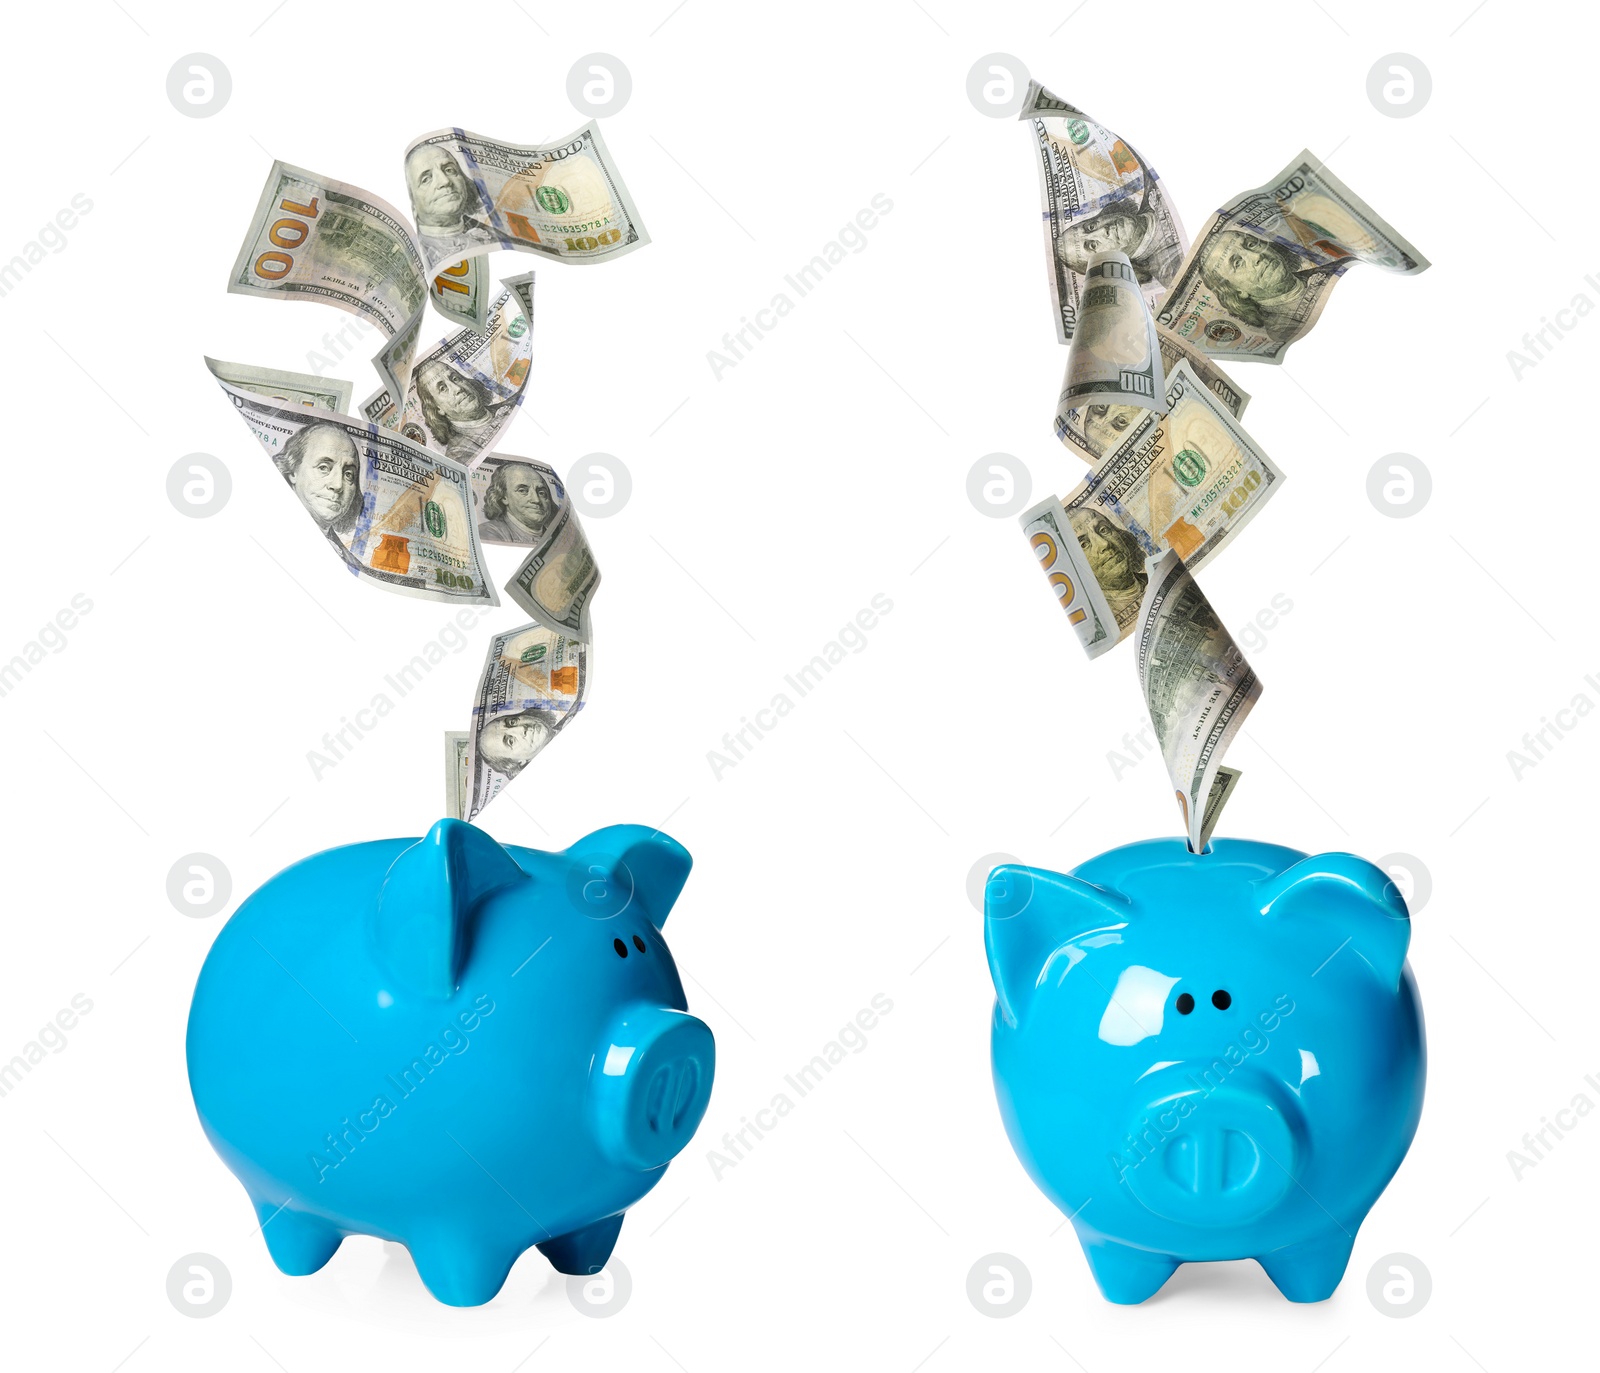 Image of Money falling into different piggy banks on white background